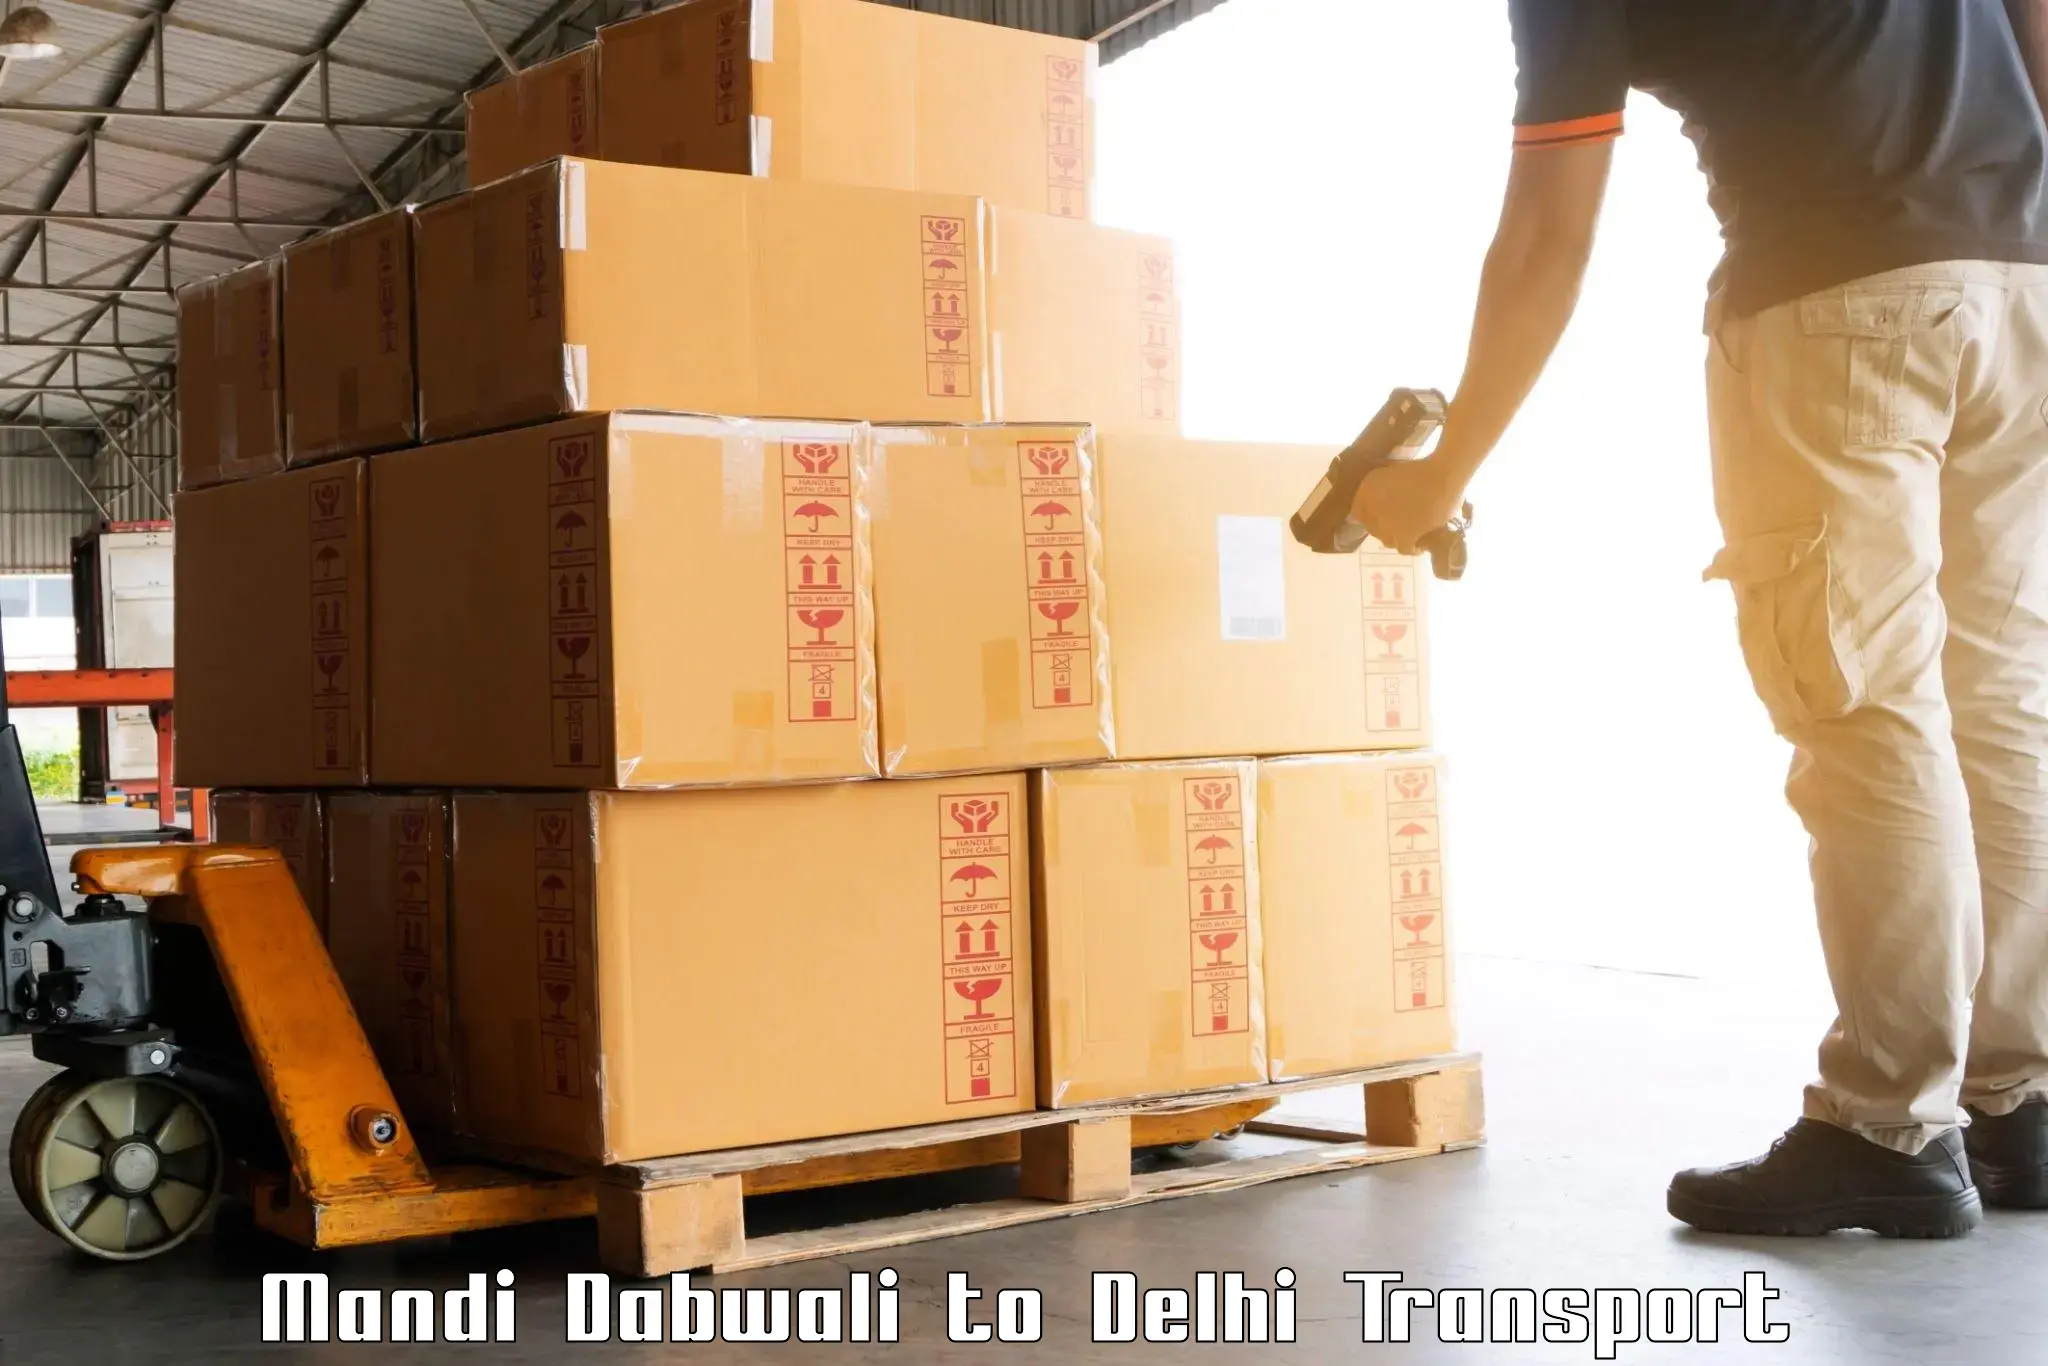 Container transport service Mandi Dabwali to NCR